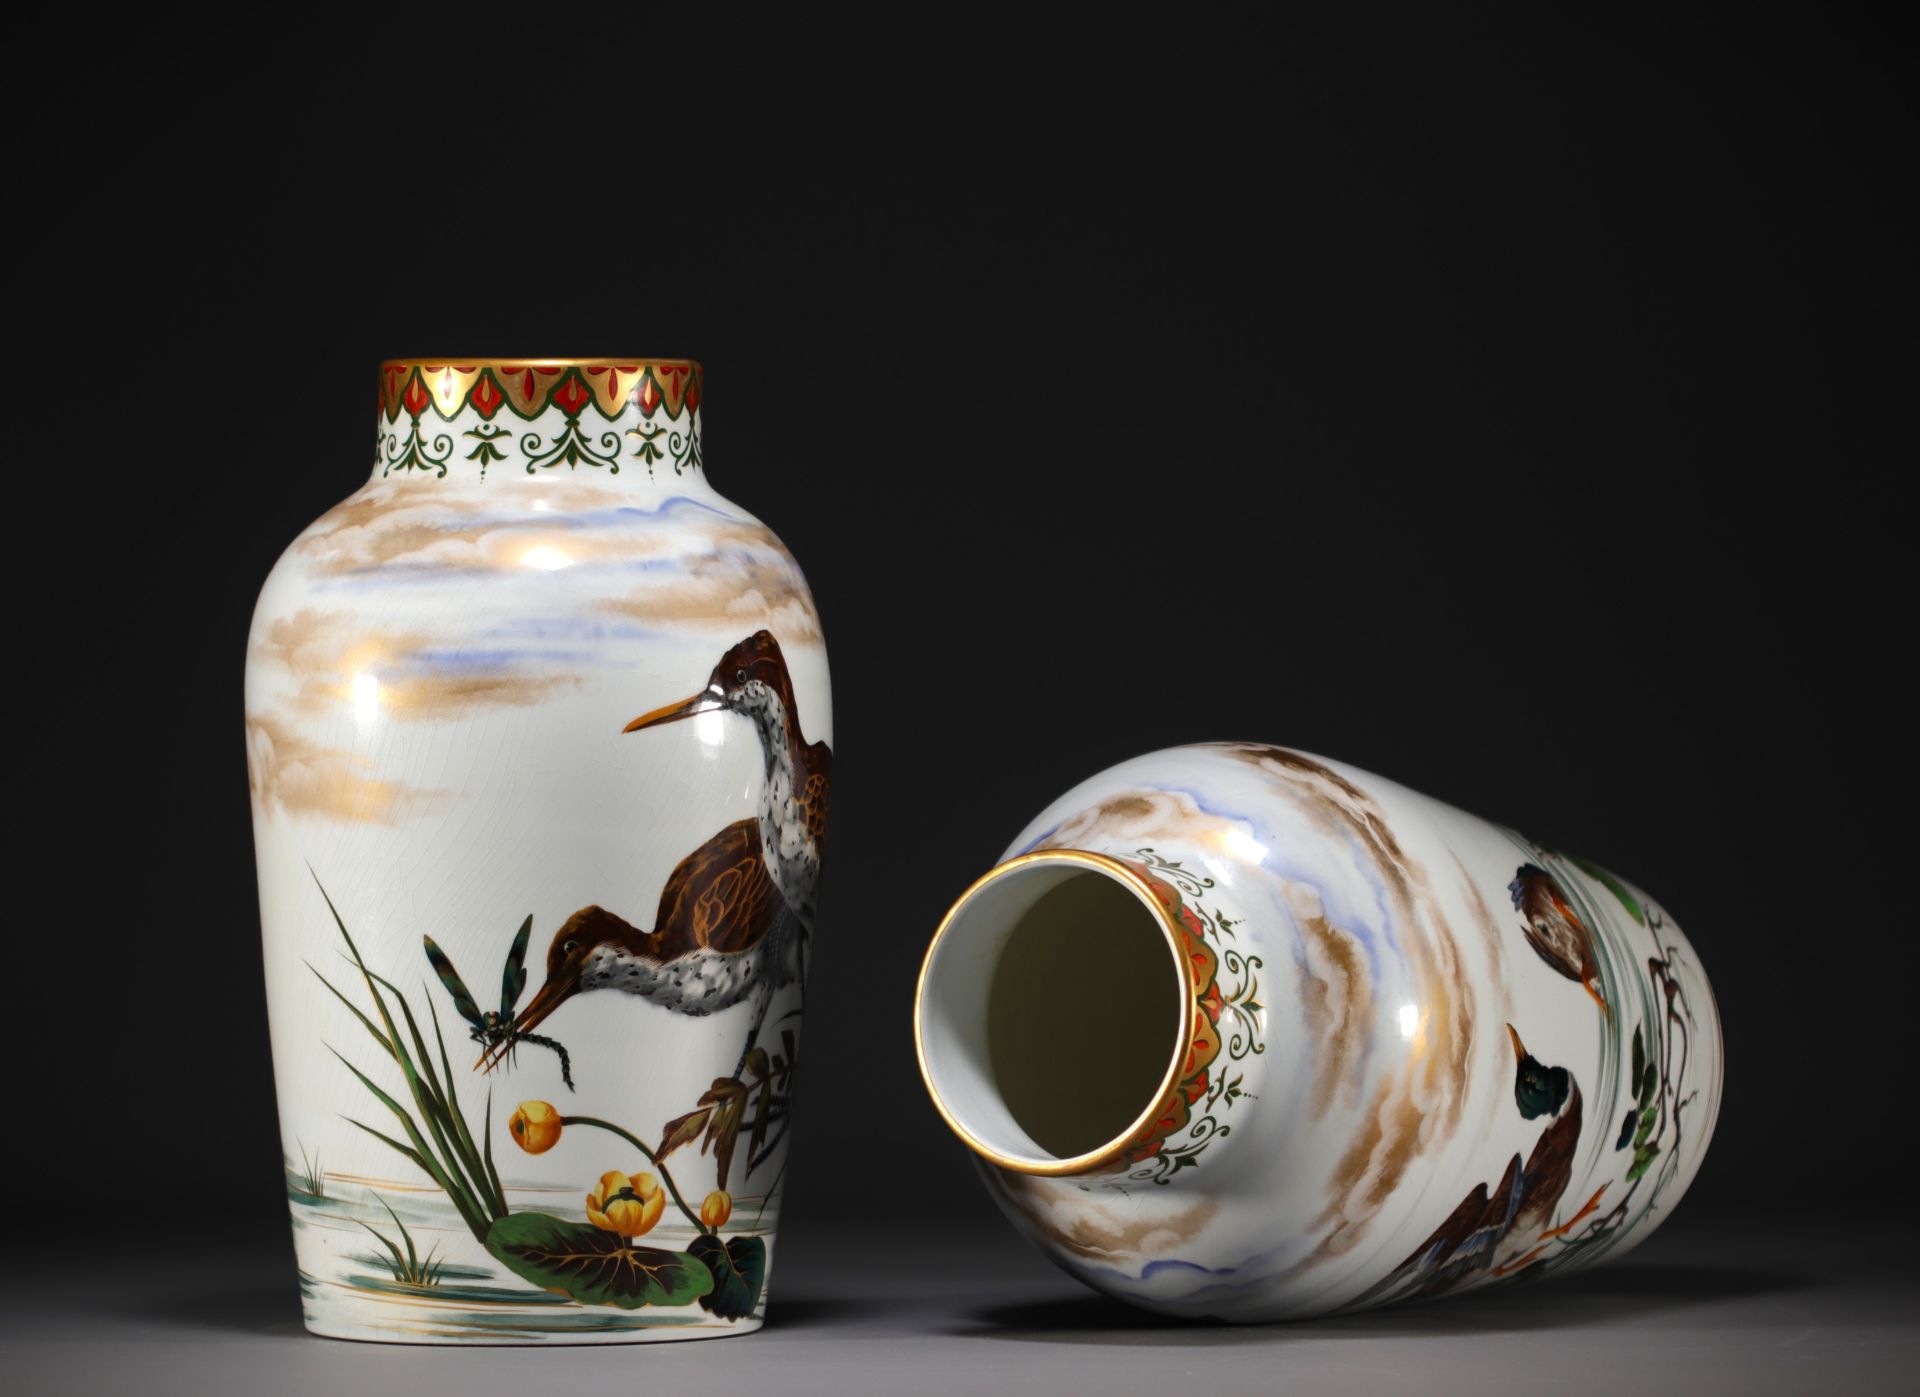 Taxile DOAT (1851-1938) - Pair of Japanese porcelain vases decorated with birds, circa 1900. - Image 3 of 5